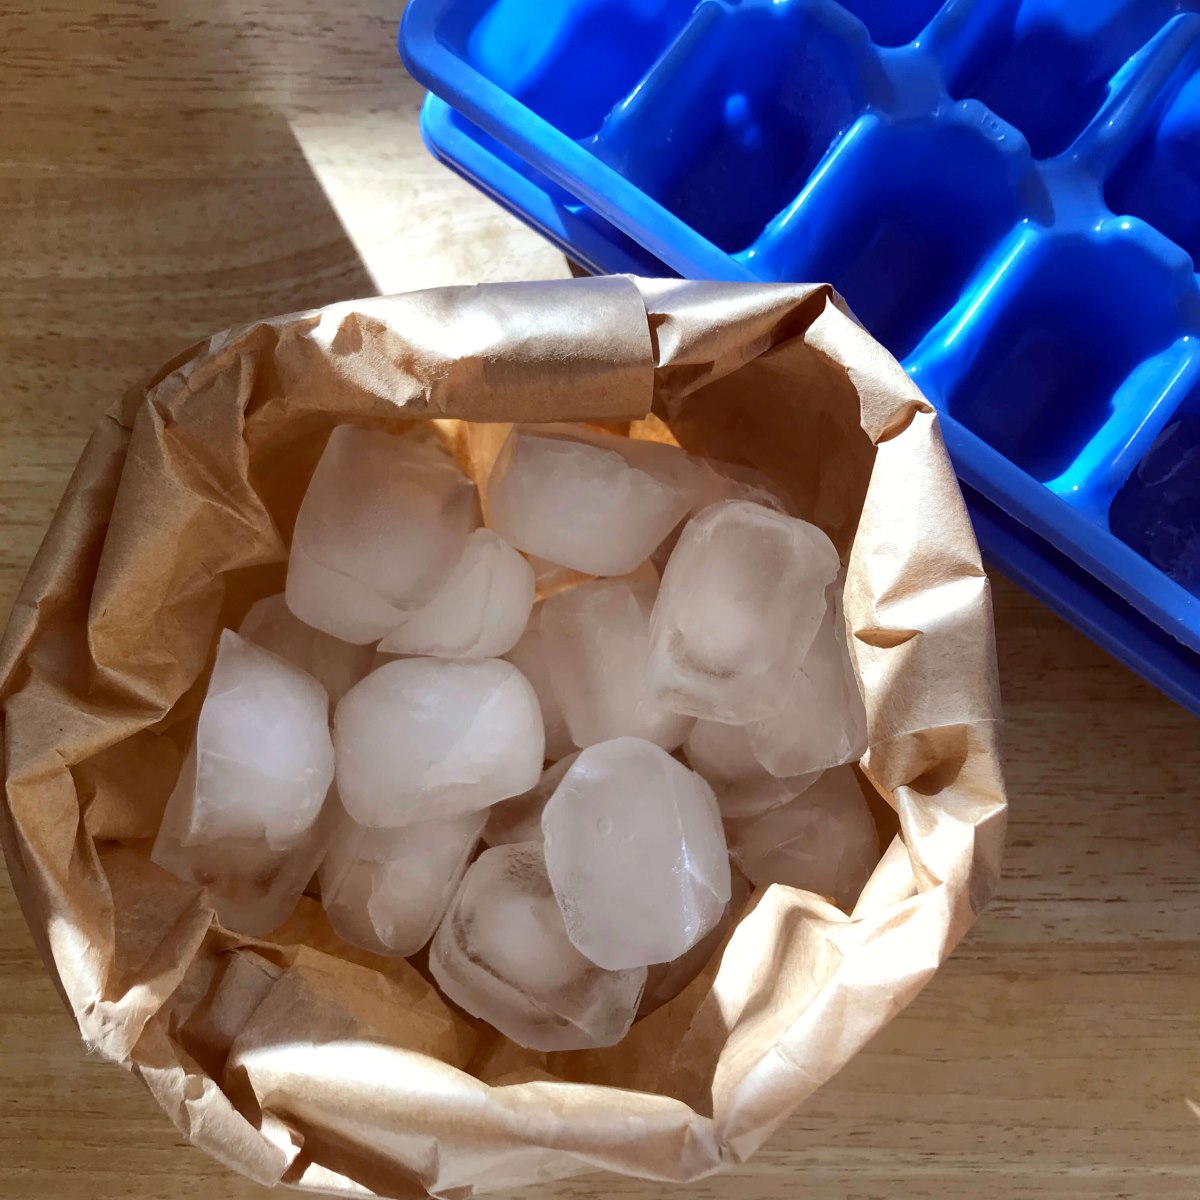 How To Store Ice Cubes Without Sticking Together